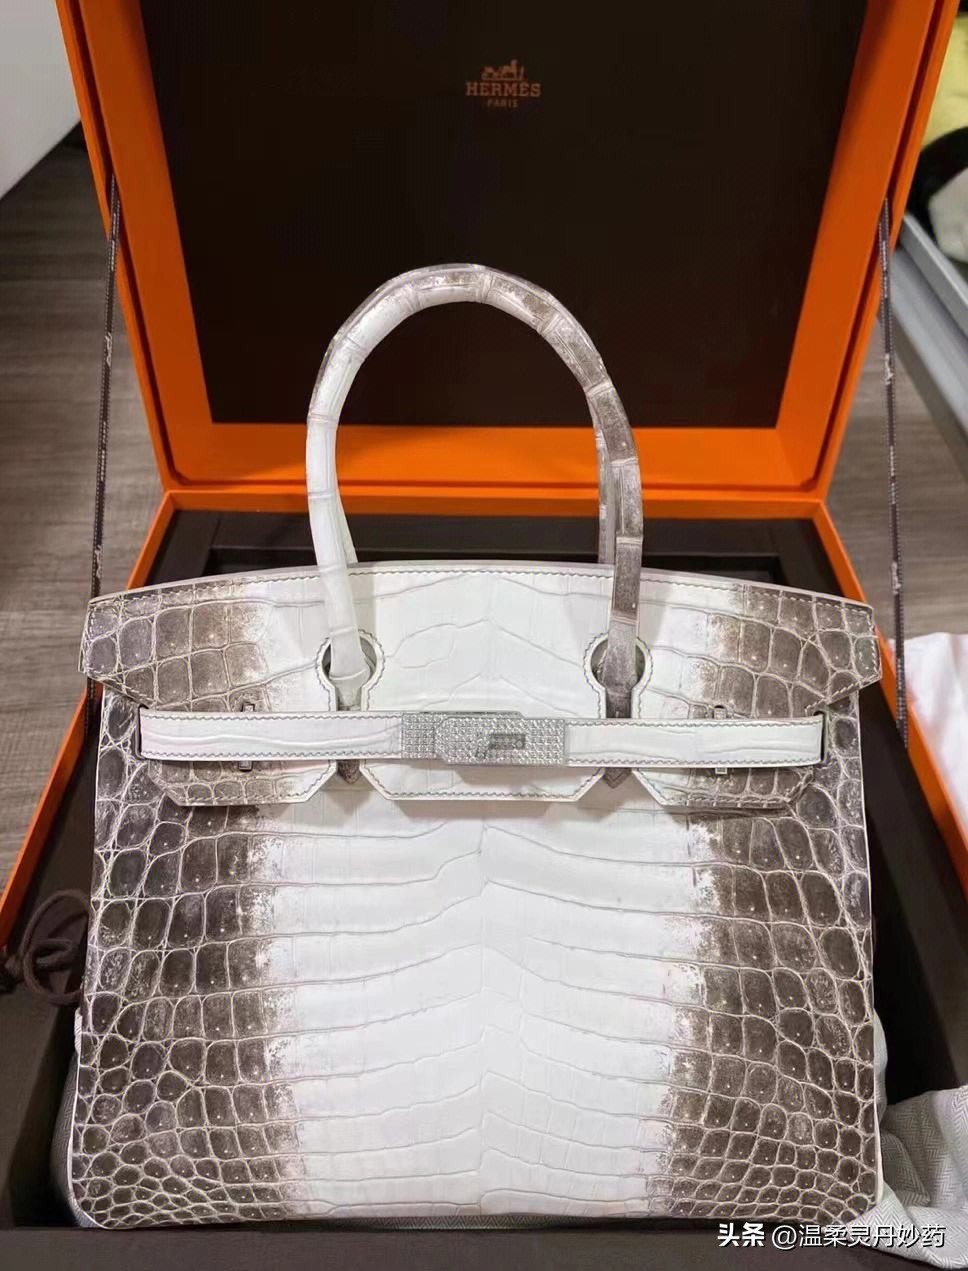 Top ten most expensive bags in the world - iMedia